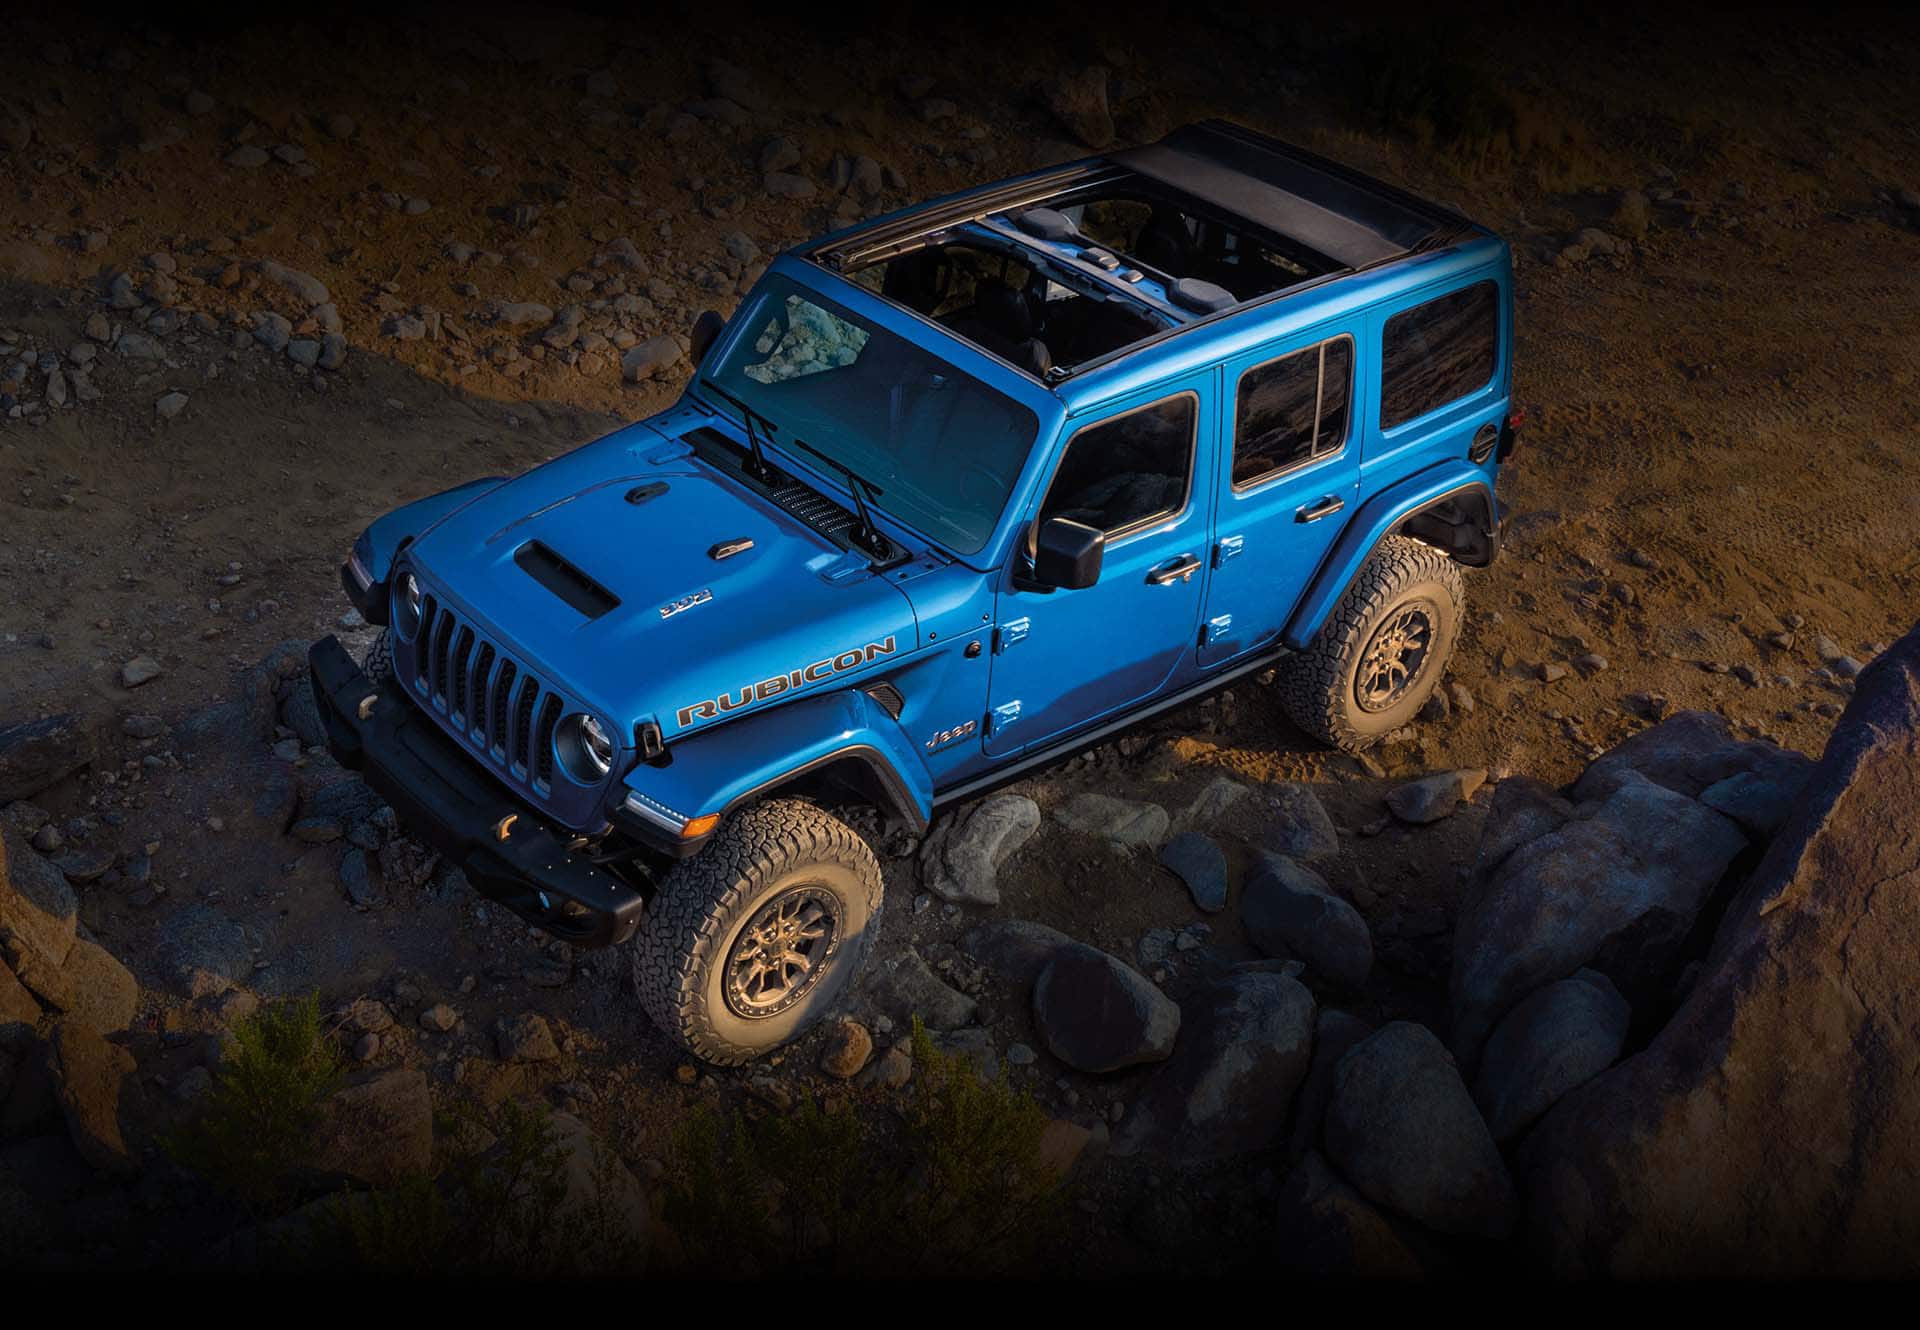 The 2023 Jeep Wrangler Rubicon 392 with its Sky One-Touch Power Top open as it is driven up a rocky slope.